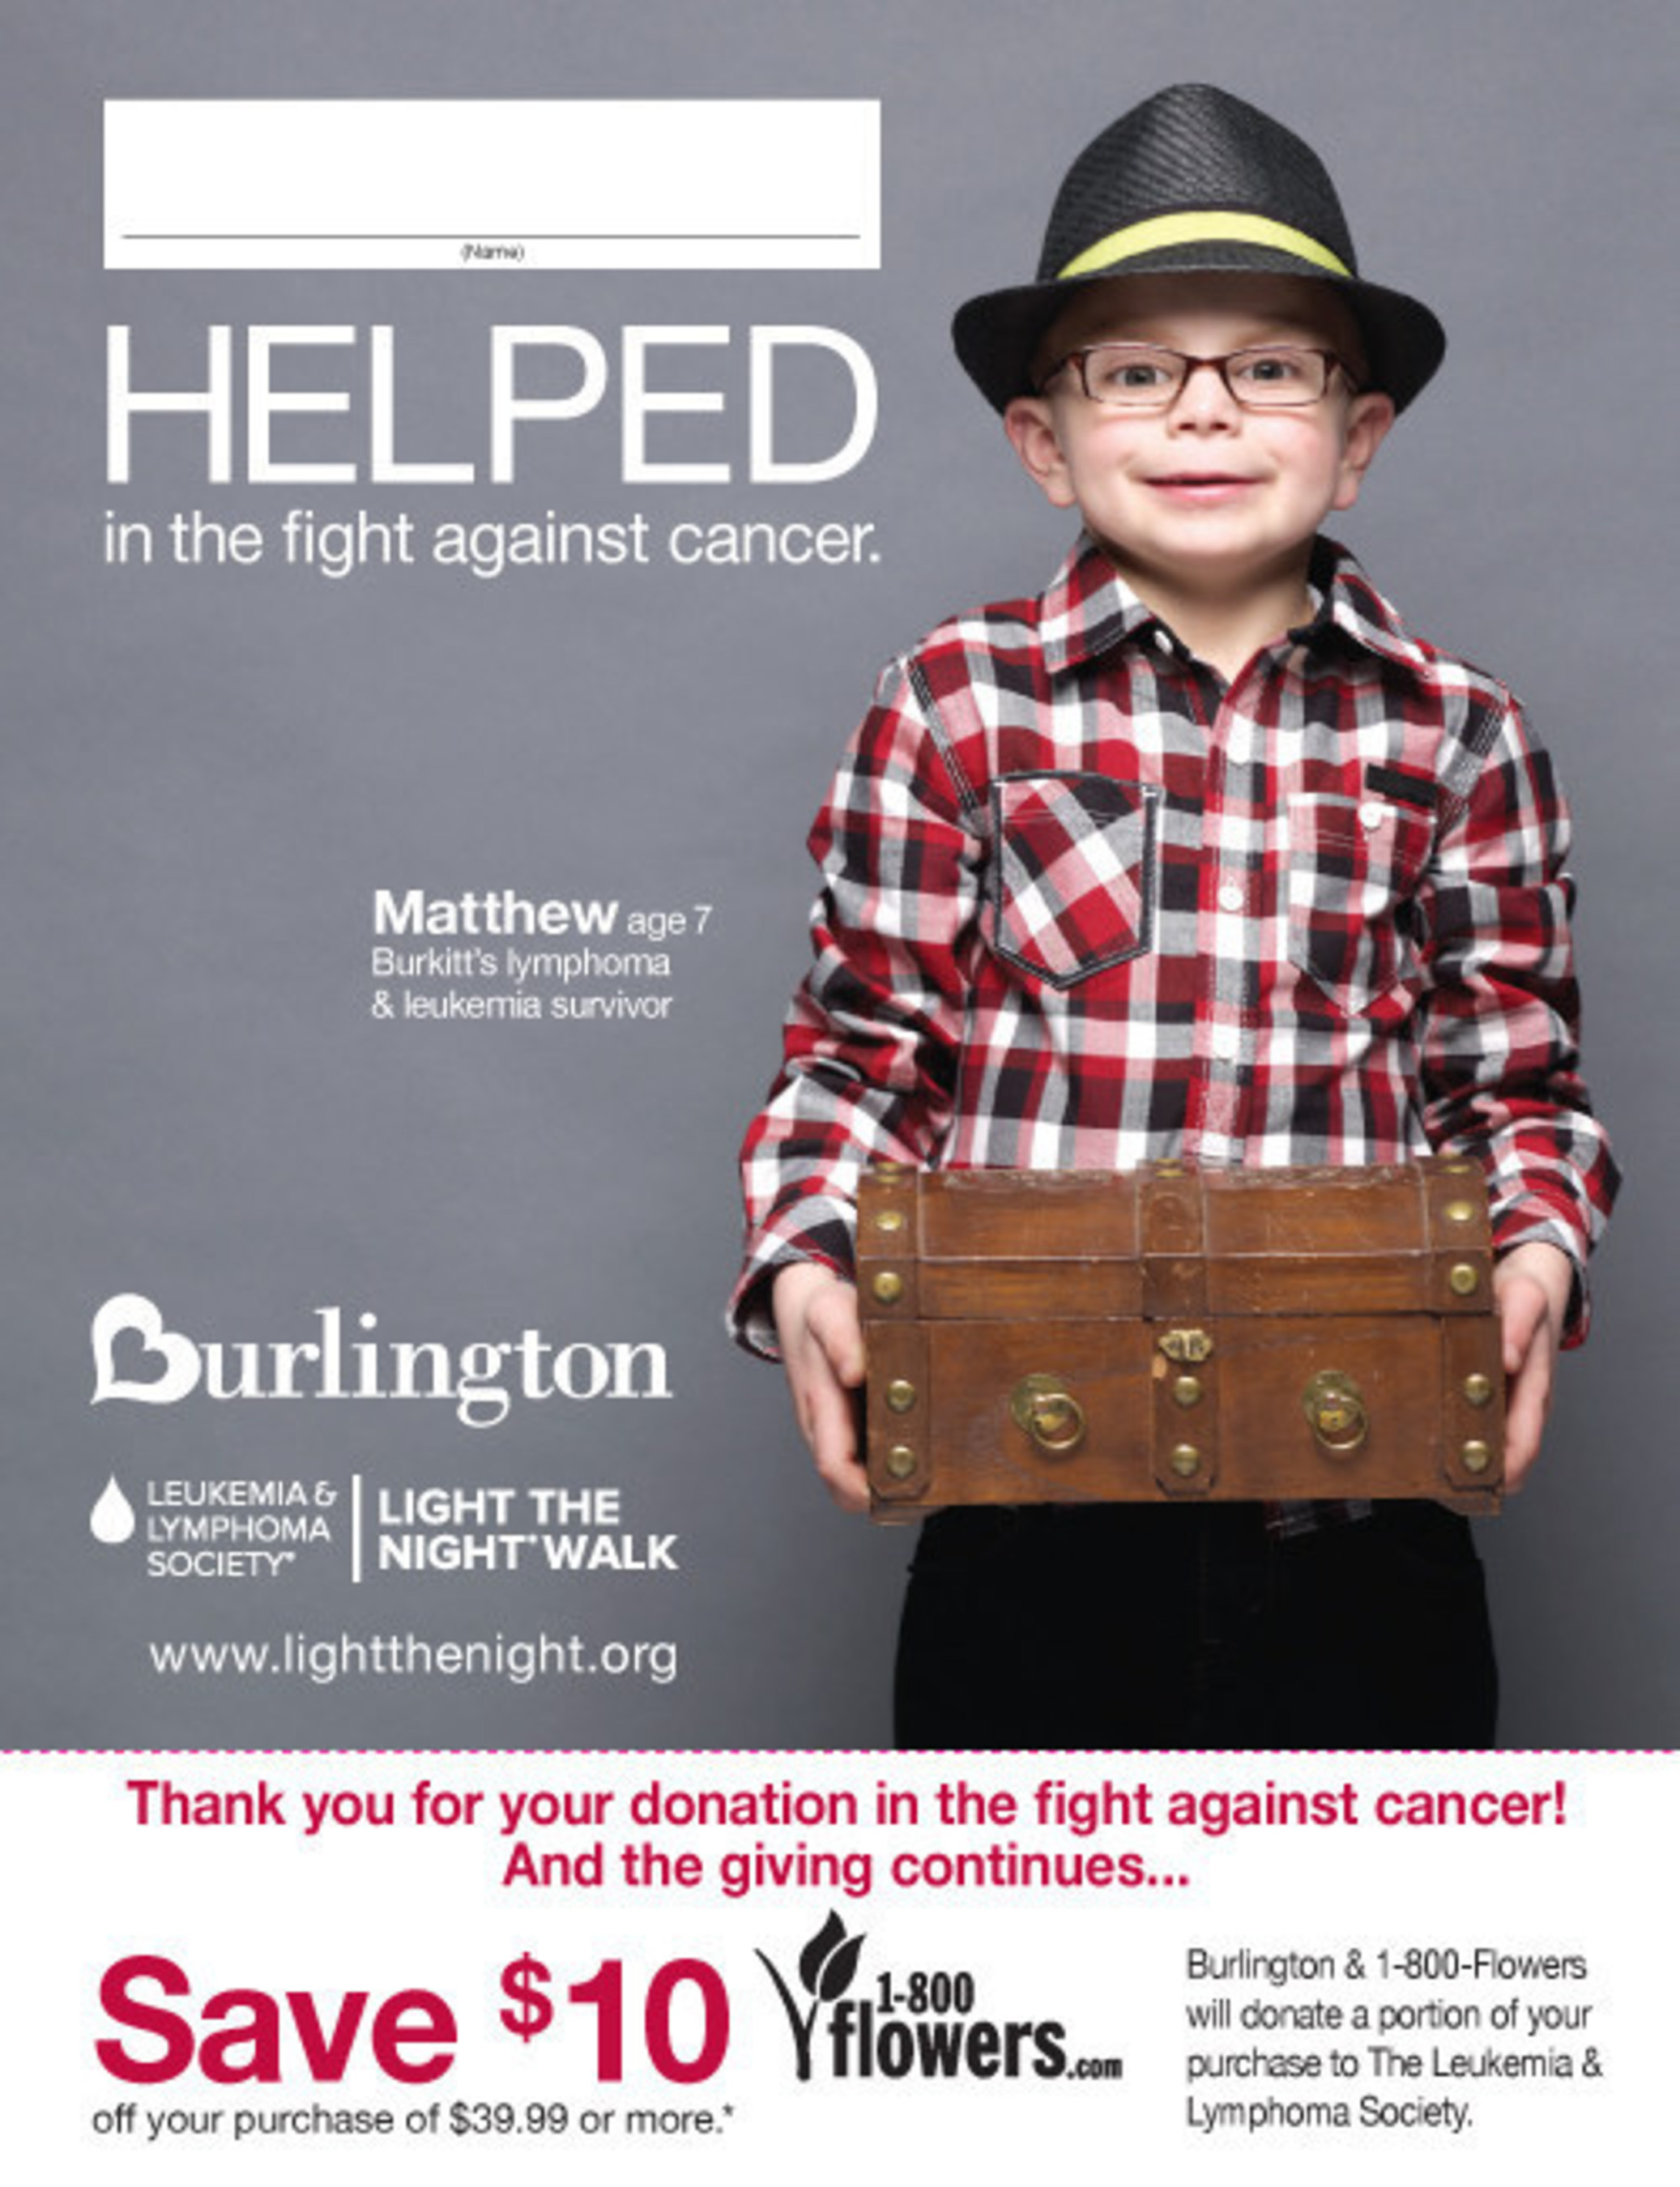 Paper icon customers receive when they make a donation at checkout to benefit LLS.  The icon features Matthew, age 7; he is a Burkitt's lymphoma and leukemia survivor.  Burlington helped fund the research that put Matthew in remission and back to his hobby of collecting treasures. (PRNewsFoto/The Leukemia & Lymphoma Society)